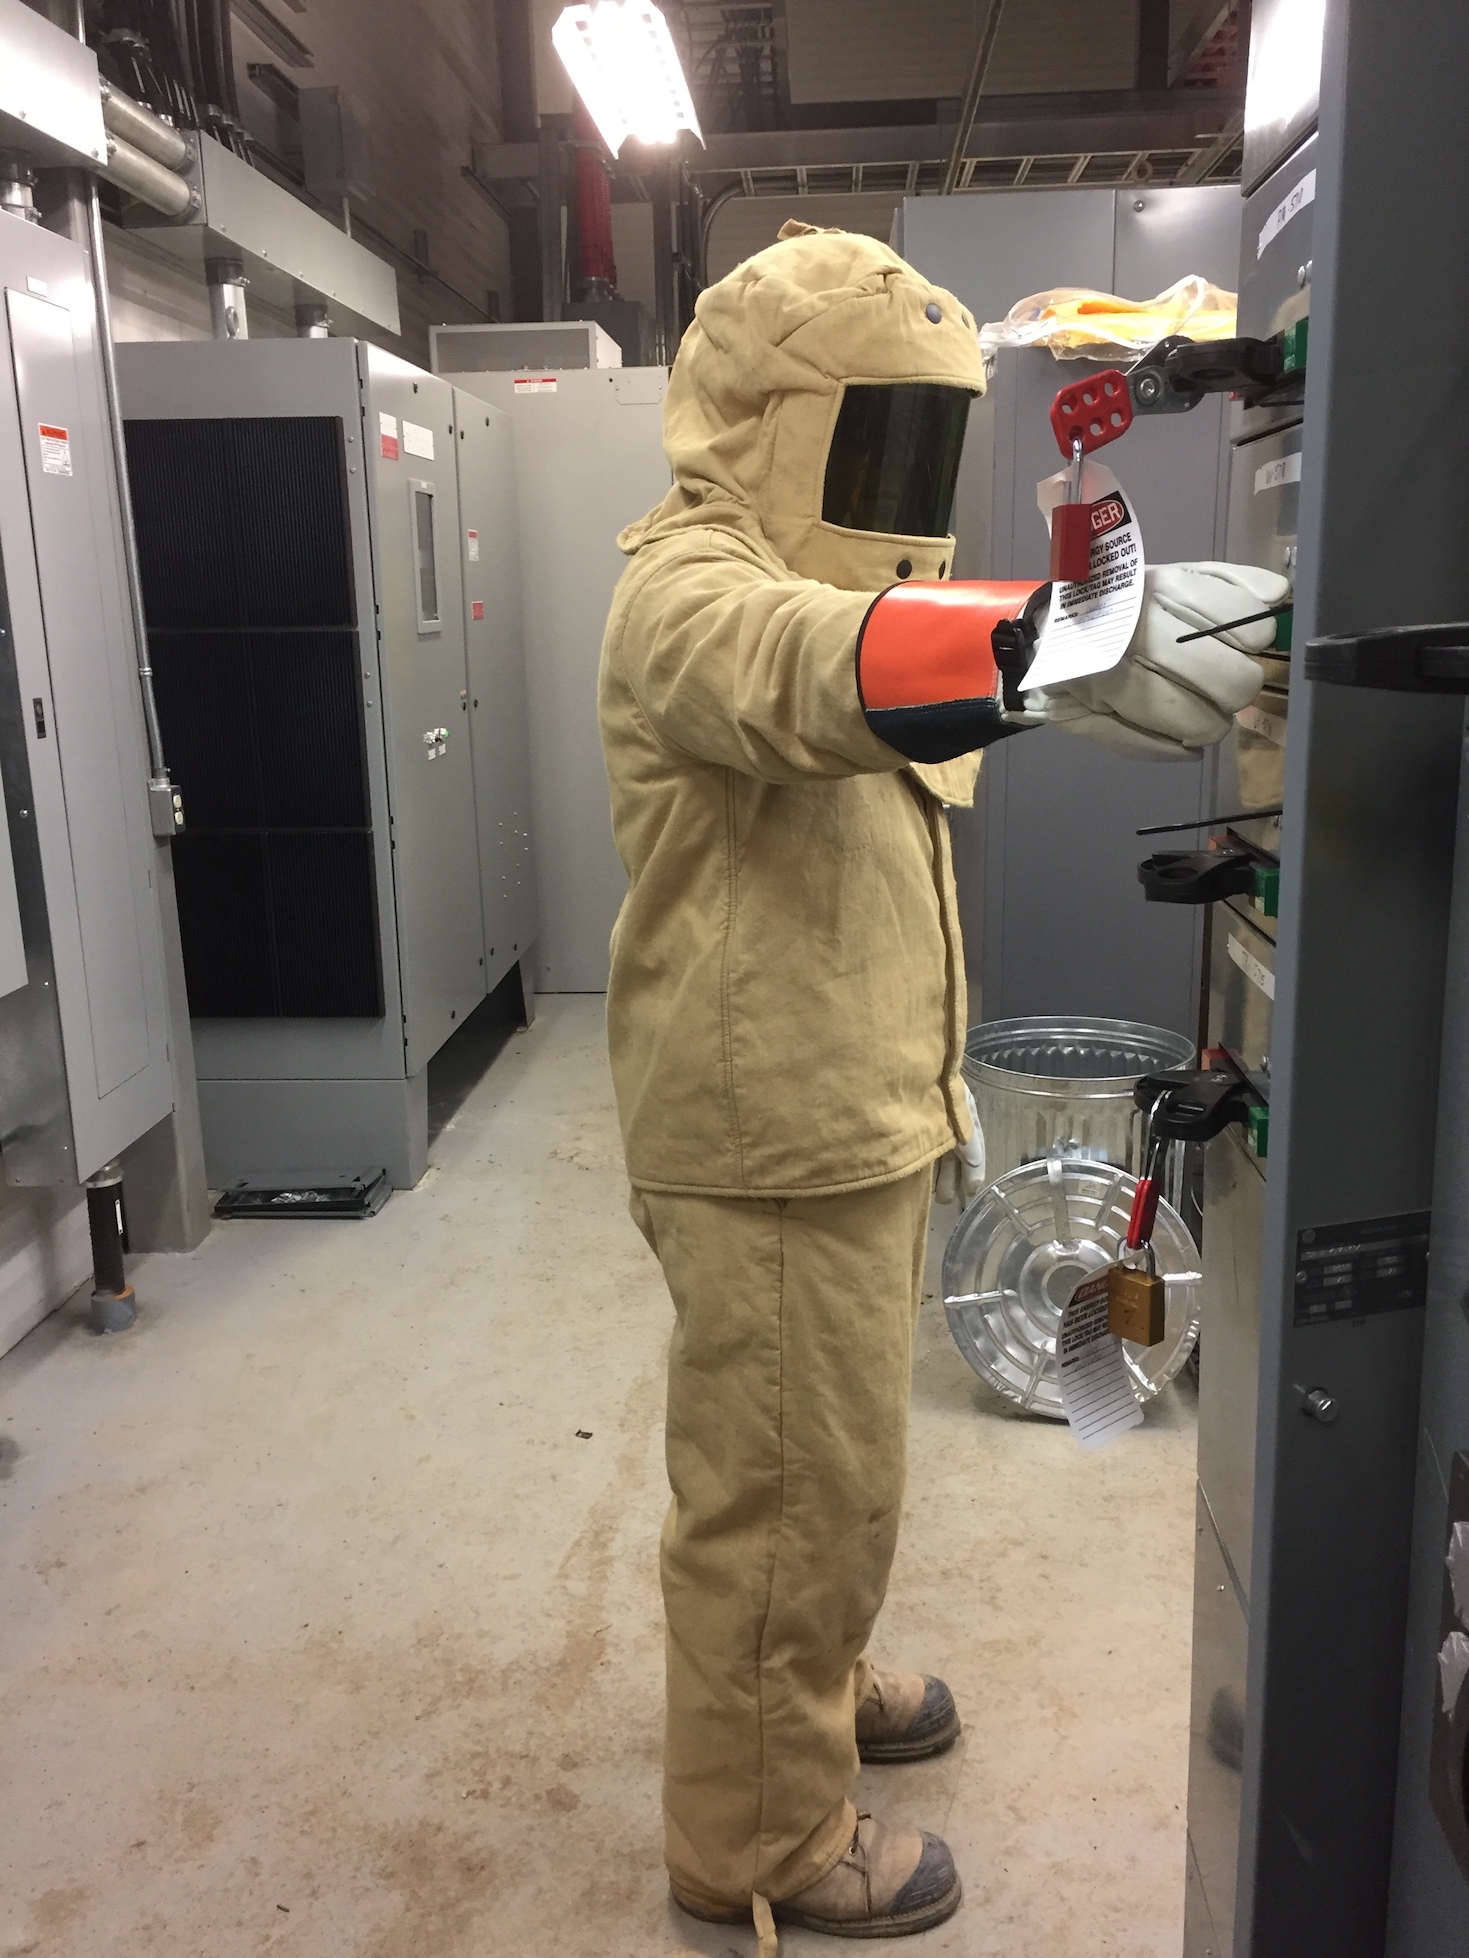 Arc Flash Protection Tip: Always stand to the side of a circuit breaker when energizing or de-energizing it